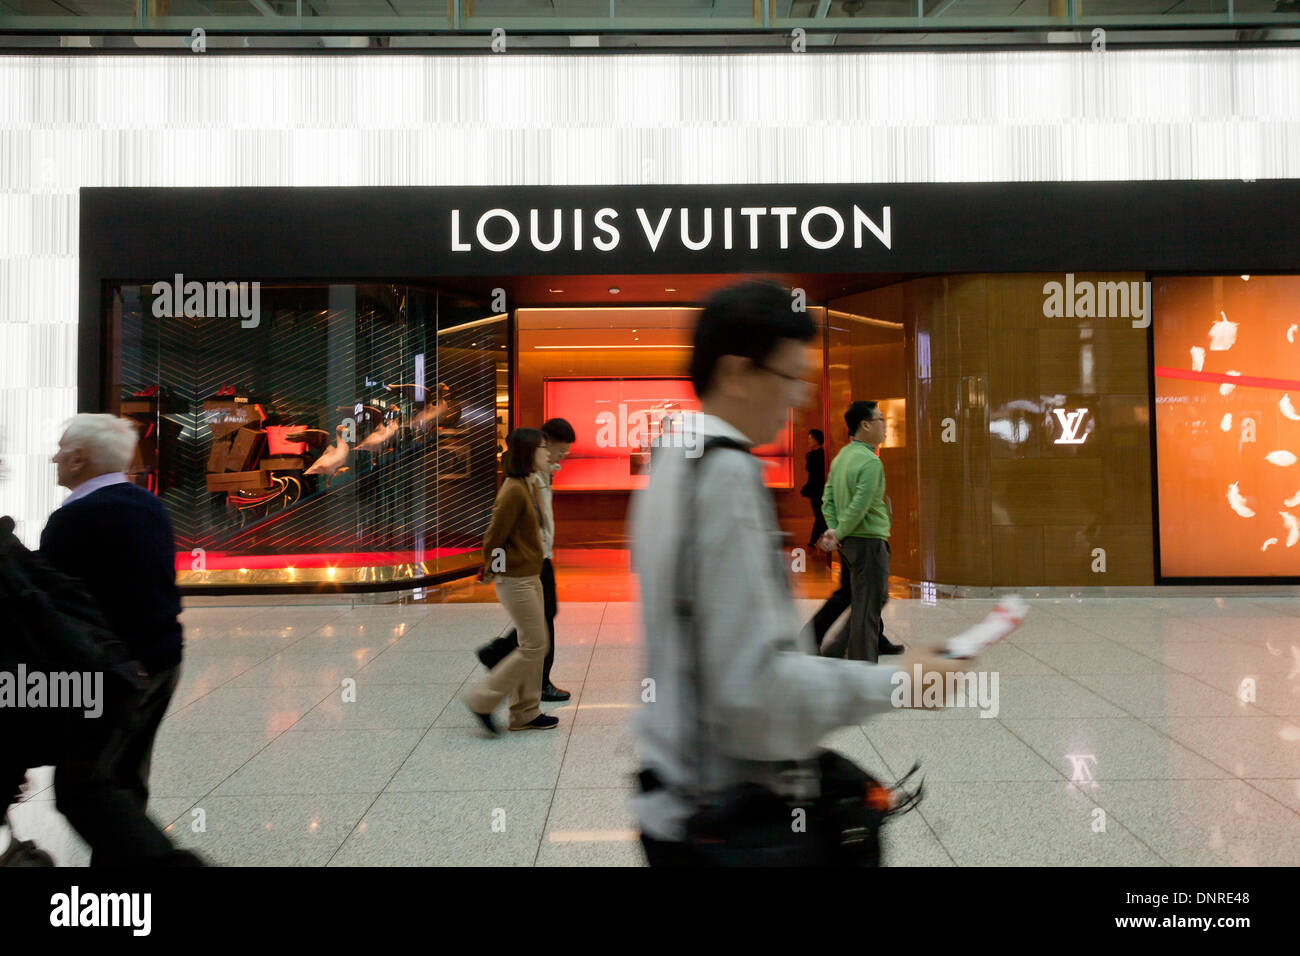 Louis Vuitton Storefront High Resolution Stock Photography and Images - Alamy